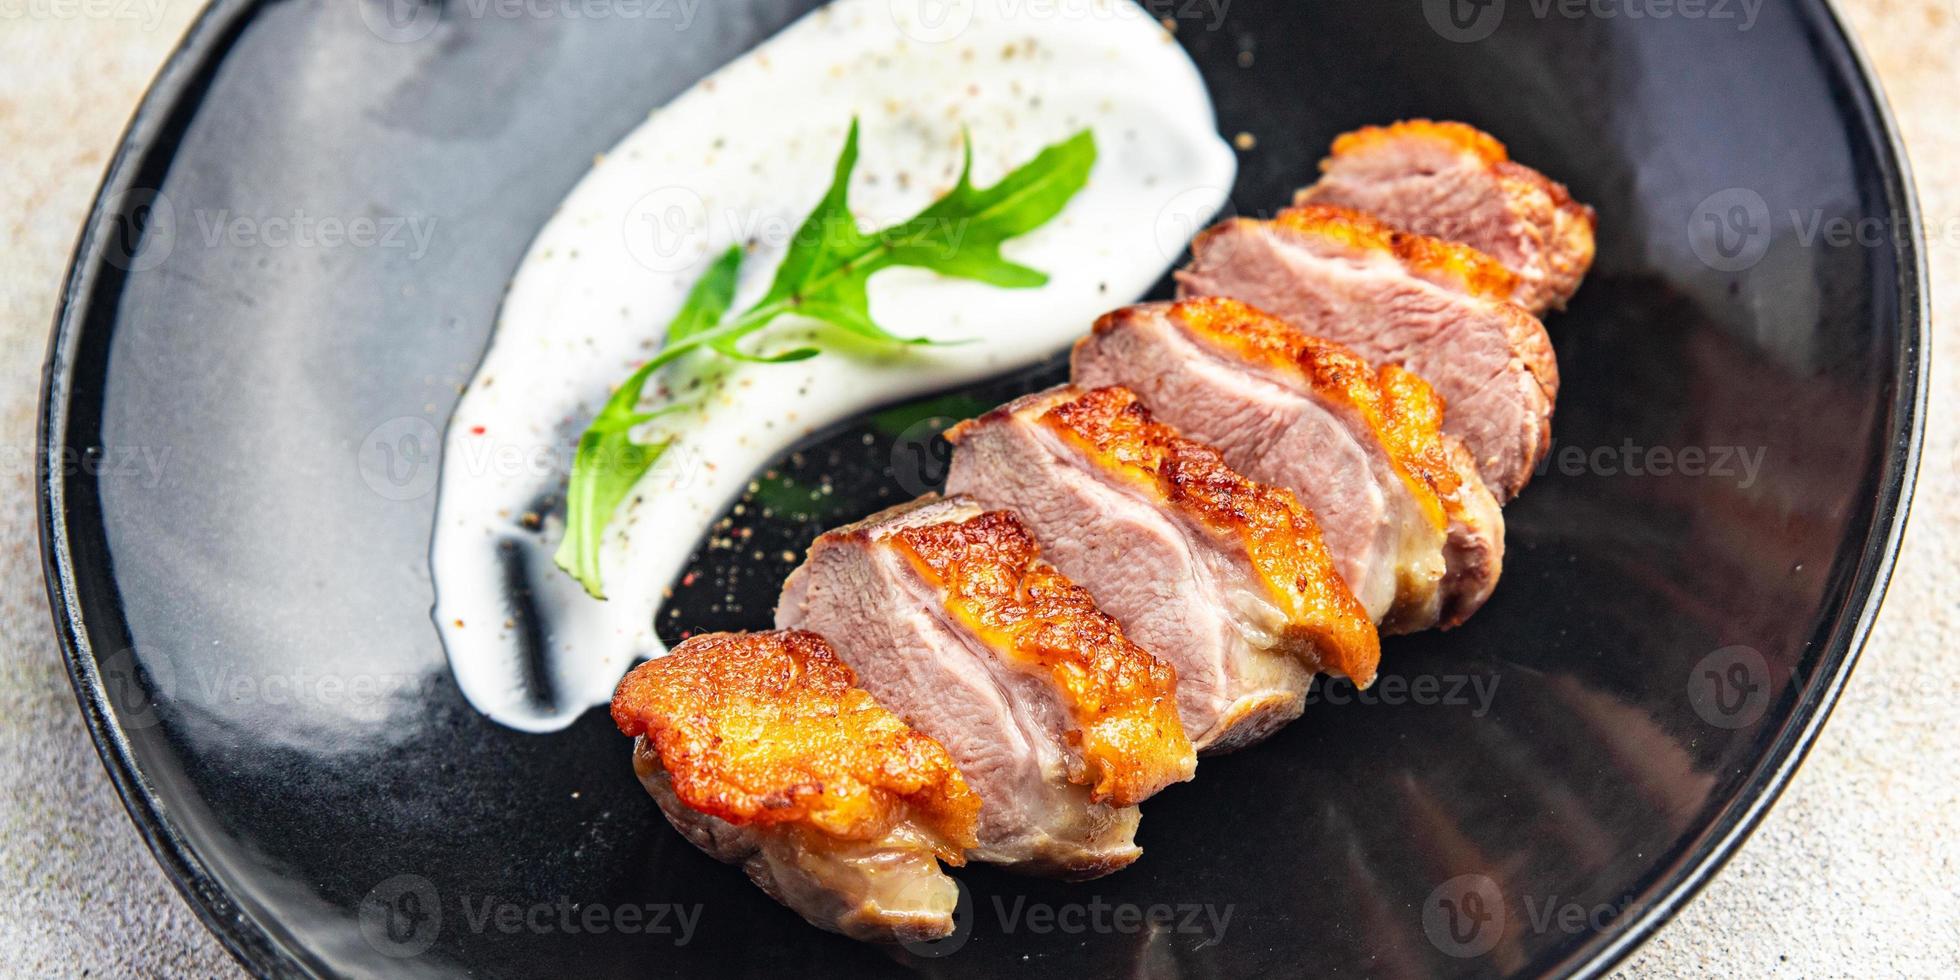 duck breast fried poultry meat second course healthy food fresh portion photo